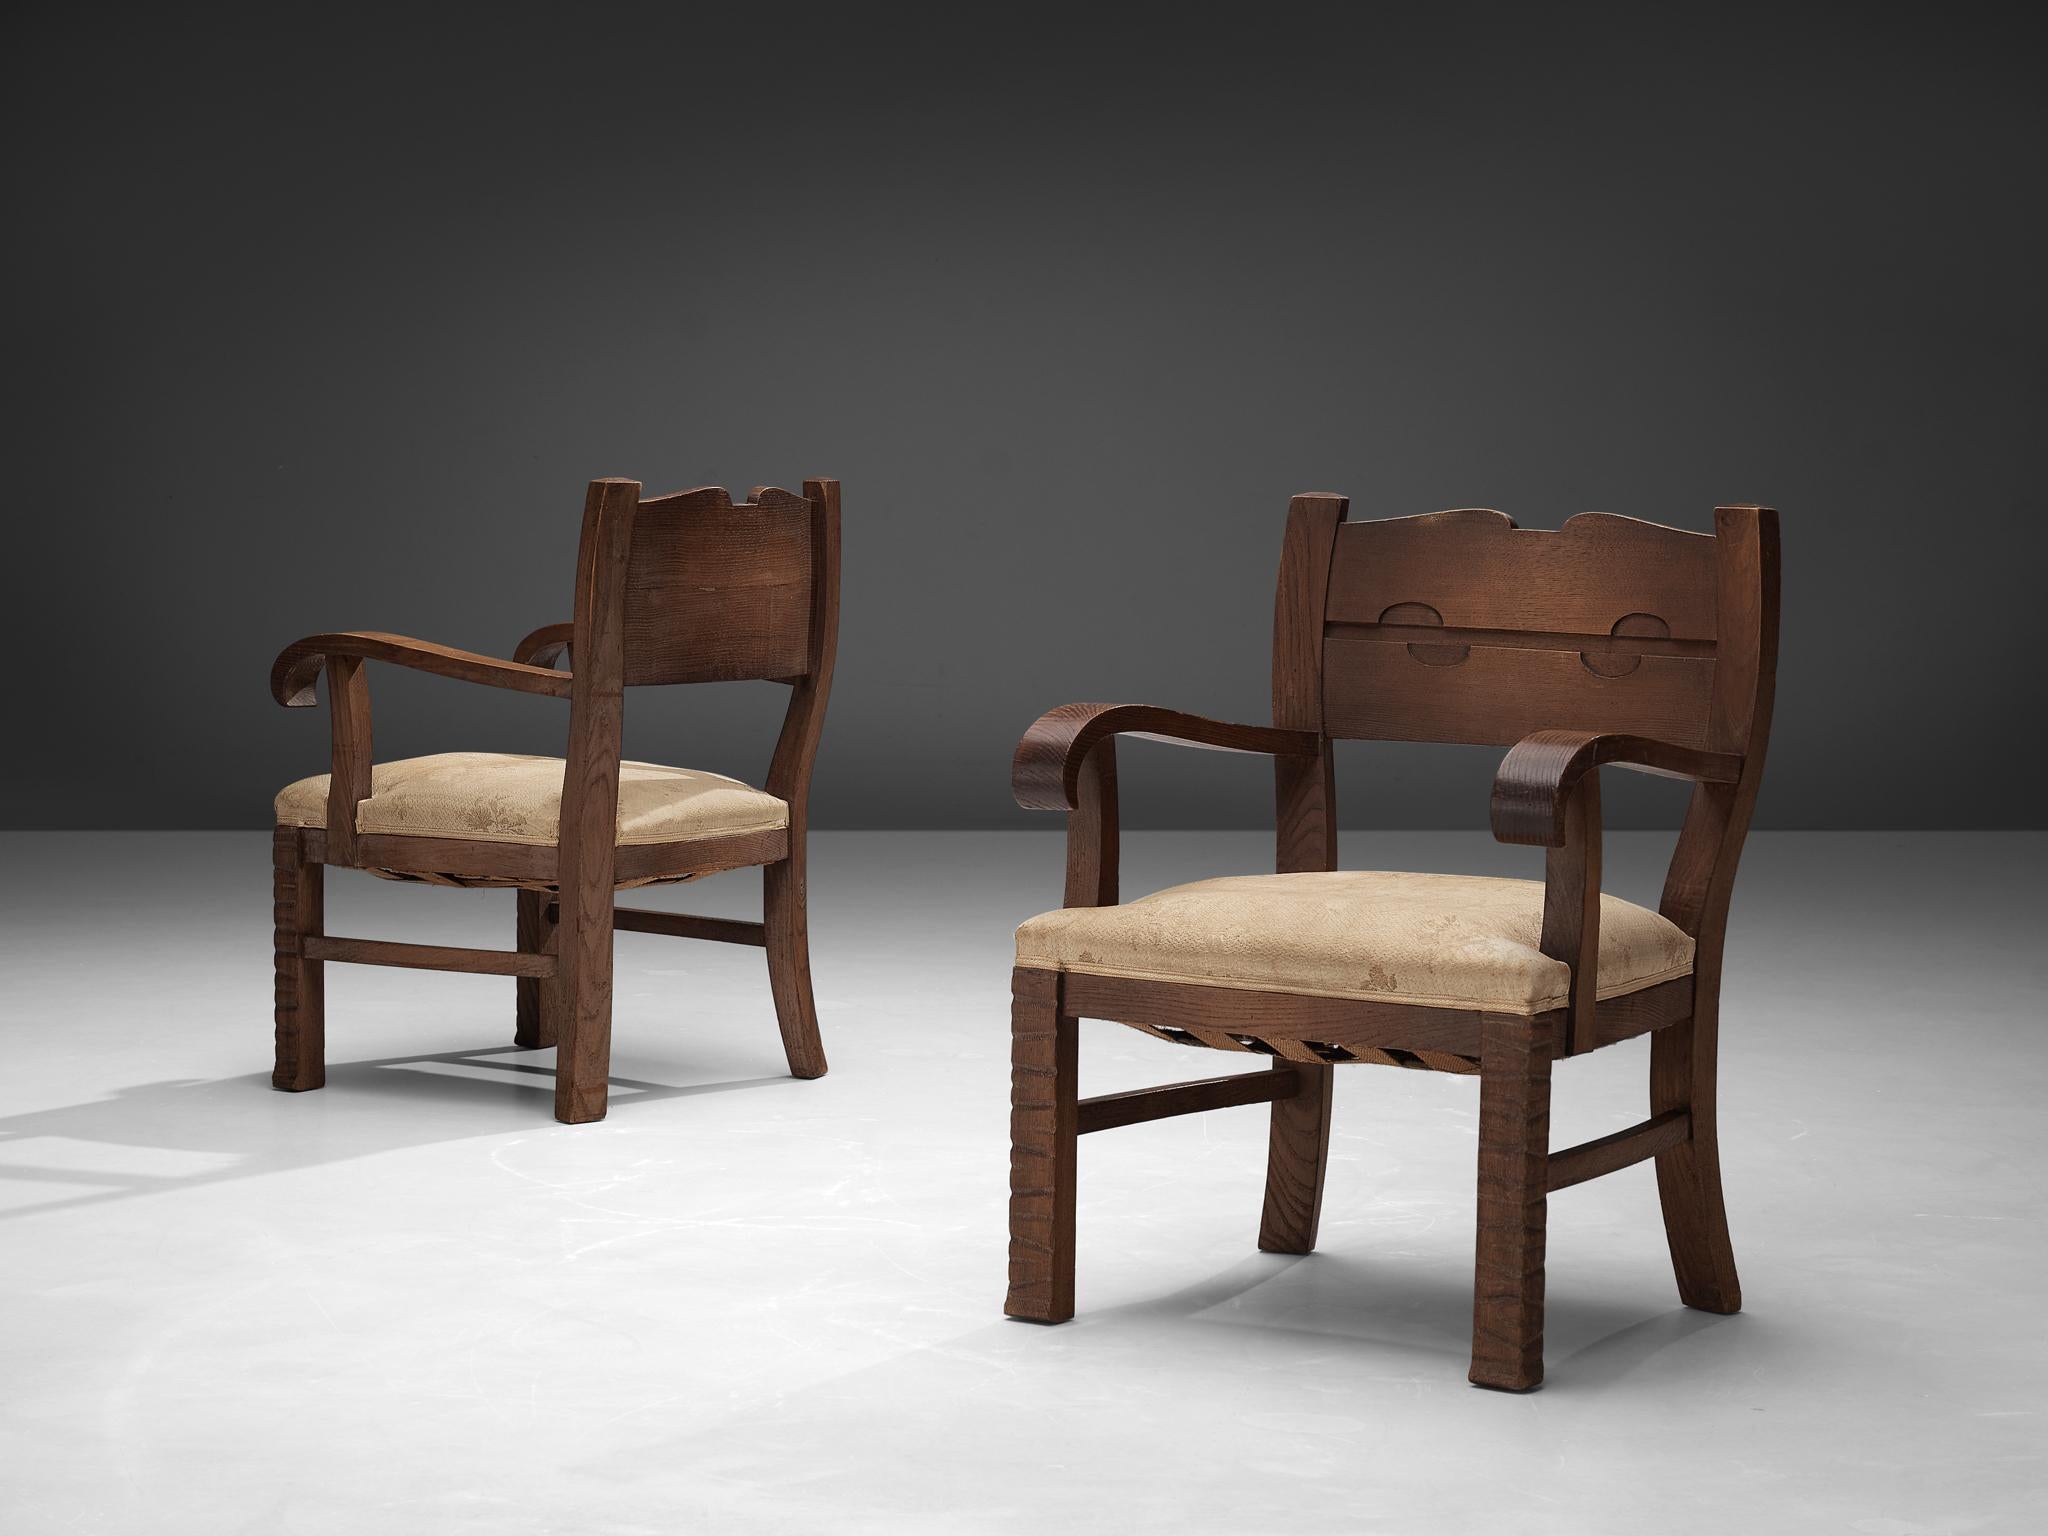 Ernesto Valabrega, pair of armchairs, oak, fabric upholstery, Italy, ca. 1935

Pair of armchairs in oak and beige floral patterned upholstery by Italian designer Ernesto Valabrega. A wide upholstered seat provides great comfort. Also the armrests